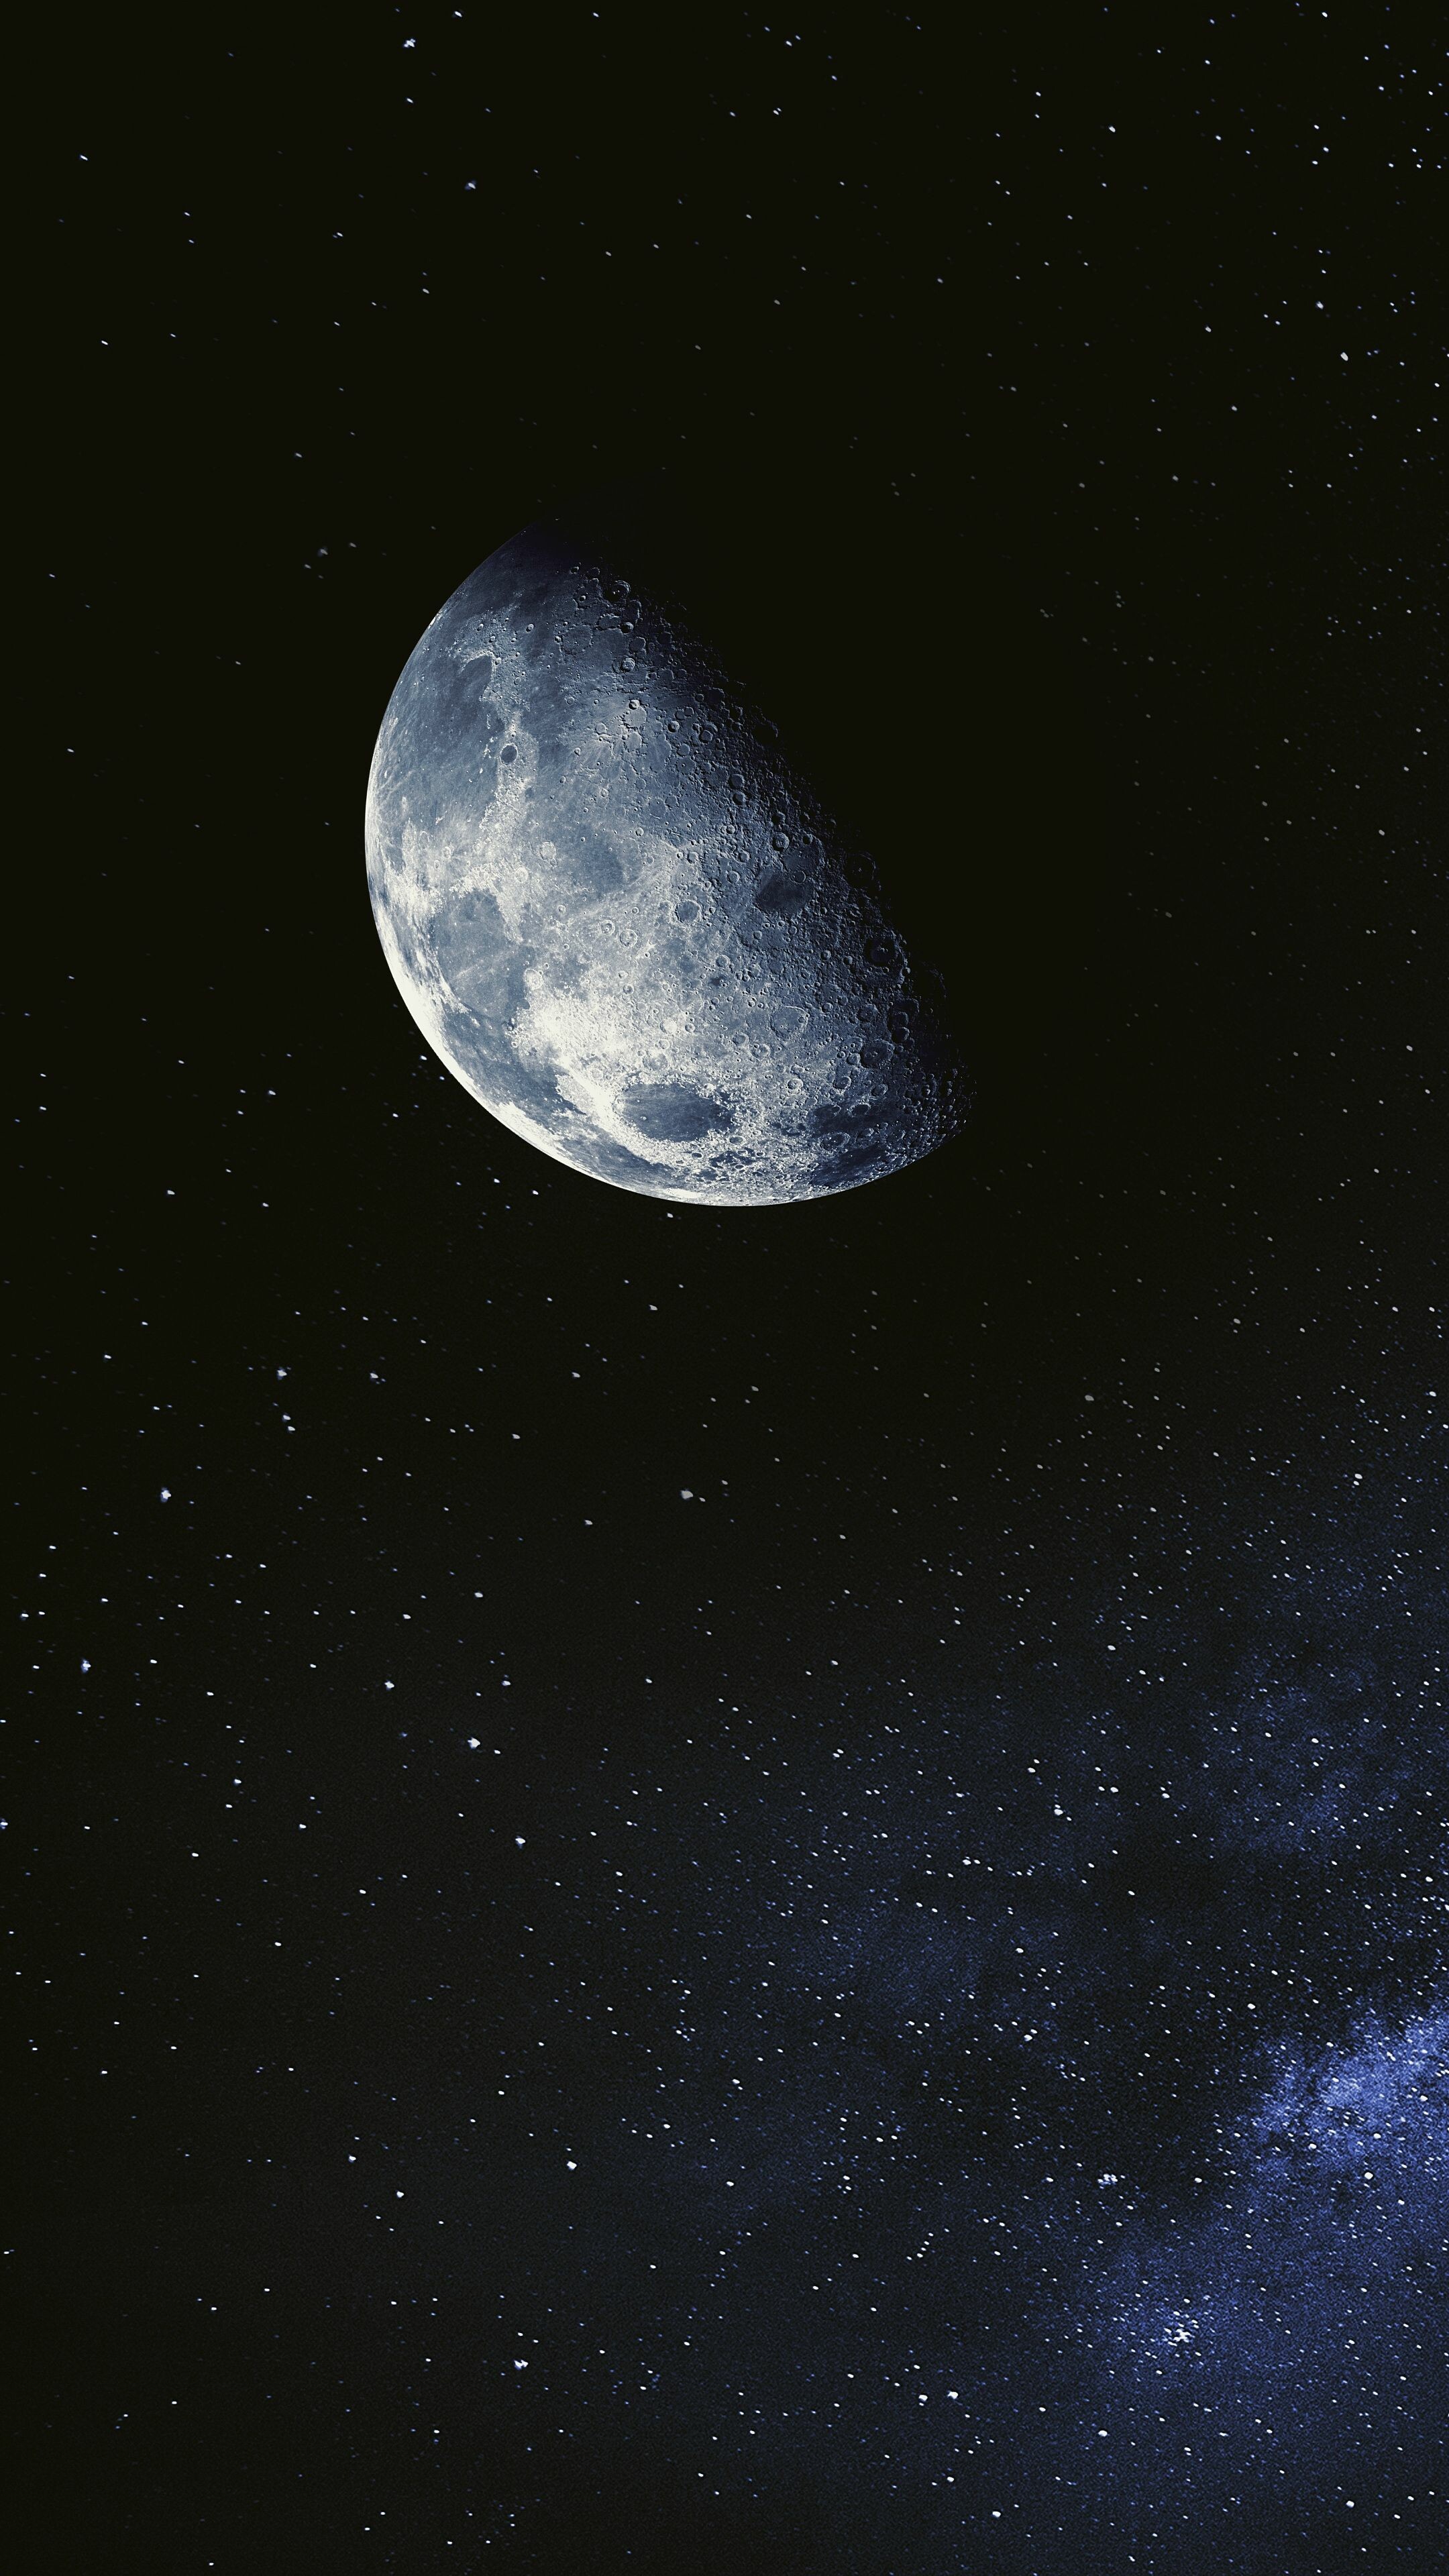 Moonlight: Moon, The fifth-largest natural satellite of the Solar System by size and mass. 2160x3840 4K Wallpaper.